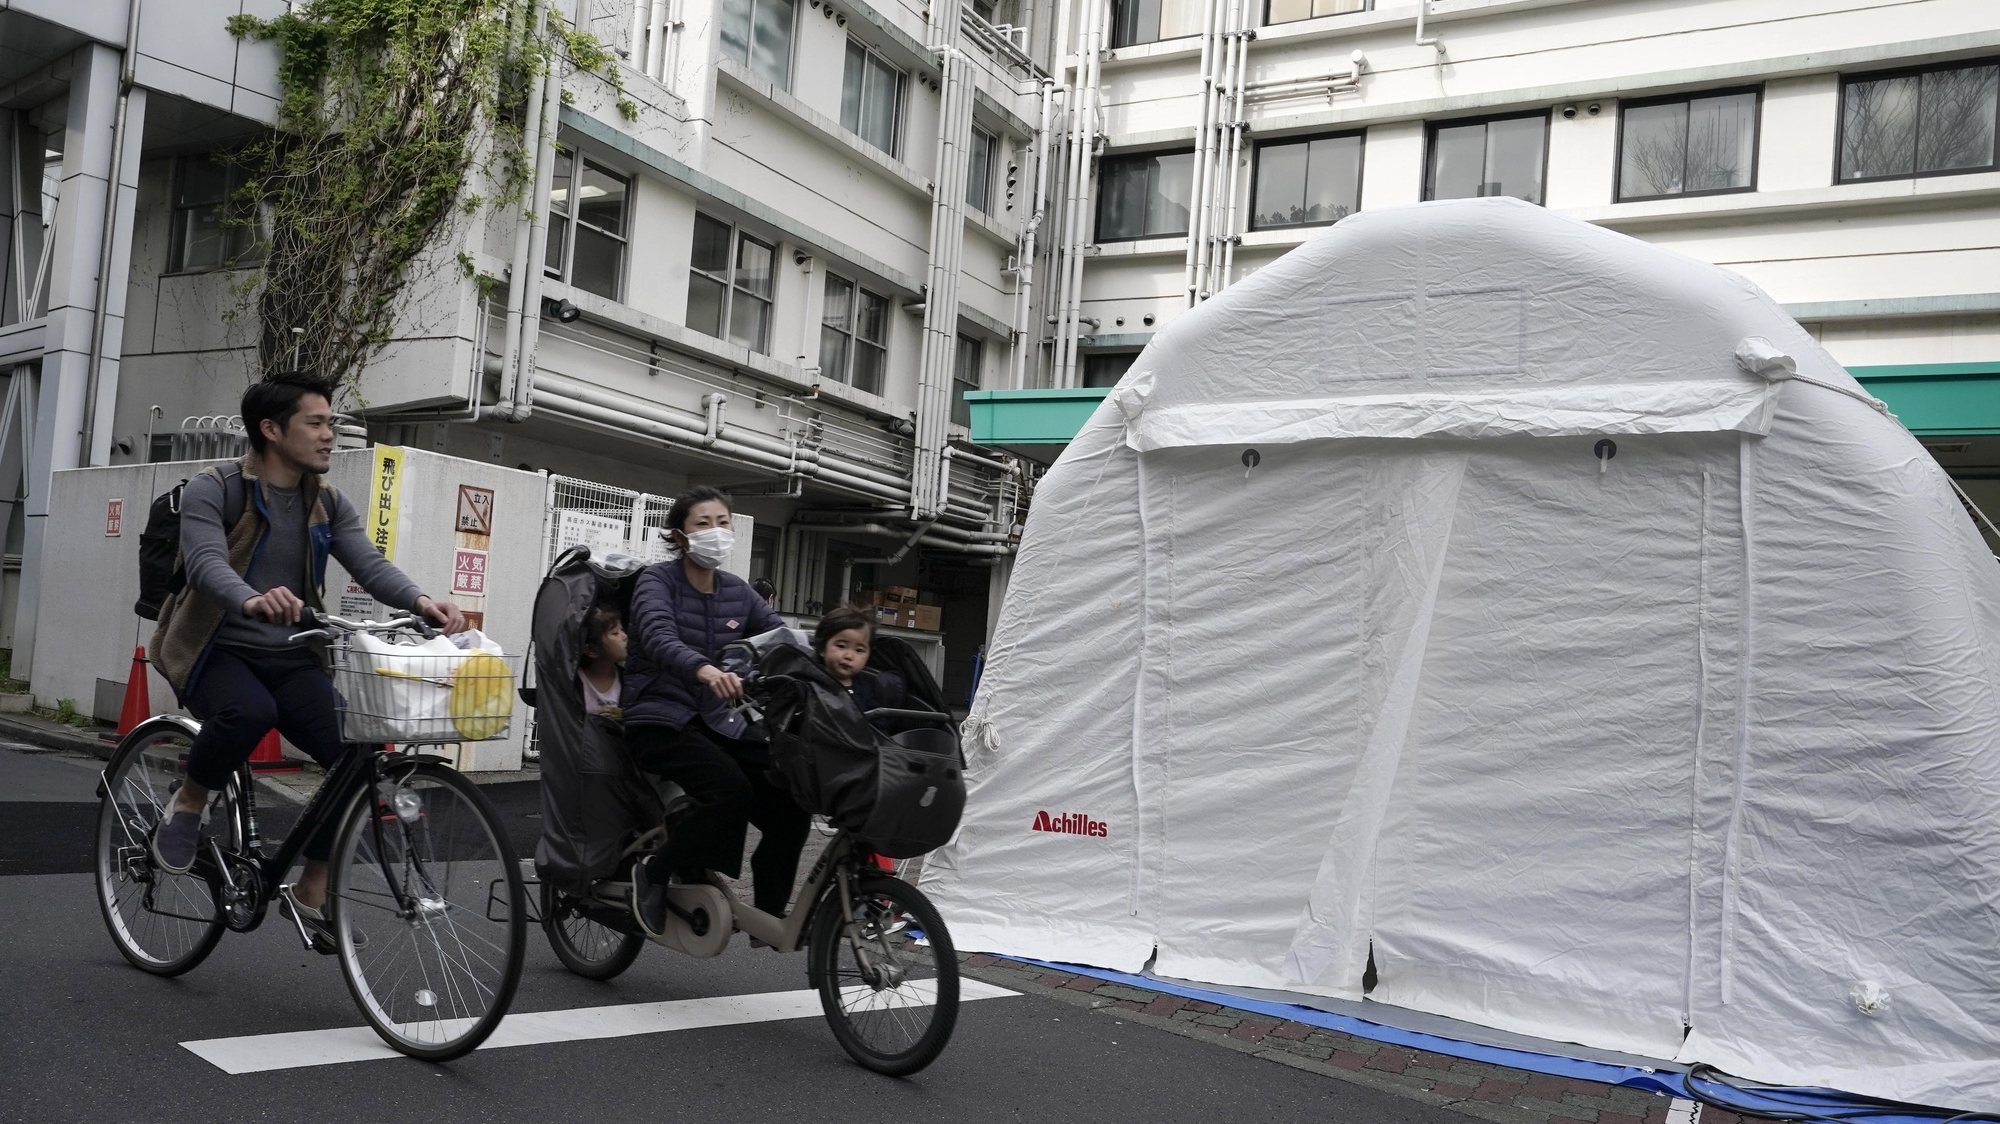 epa08374699 A family cycles past tents for COVID-19 testing outside Kawakita General Hospital in Tokyo, Japan, 21 April 2020. Japan has recently witnessed a sharp rise in infections. Prime Minister Shinzo Abe declared on 16 April 2020 a nationwide state of emergency. According to media reports, a new wave of COVID-19 infections is threatening the country’s healthcare system, with several hospitals forced to turn away sick people.  EPA/KIMIMASA MAYAMA